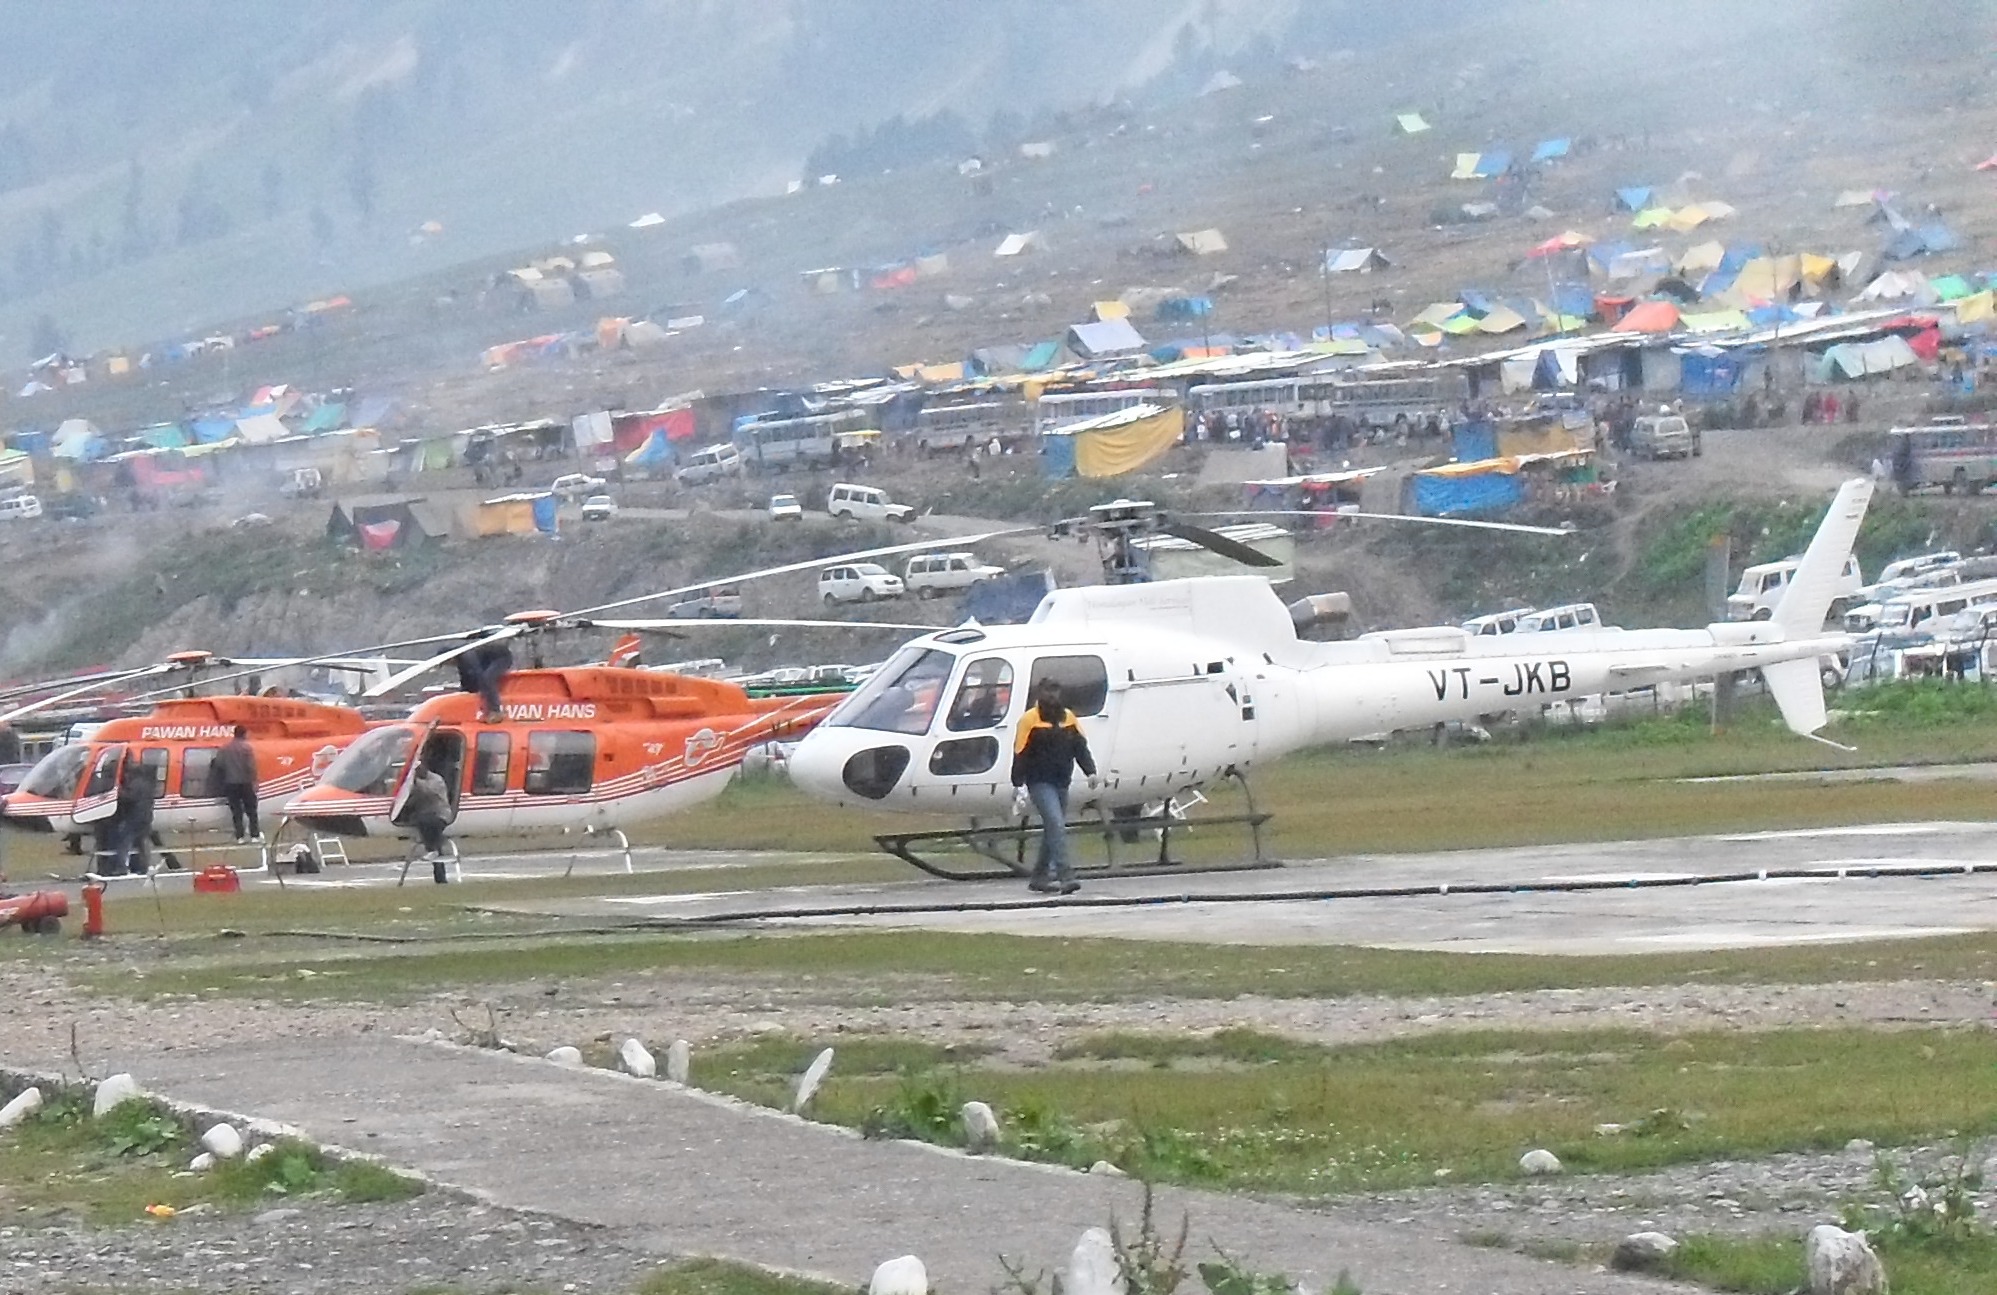 chardham atra by helicopter